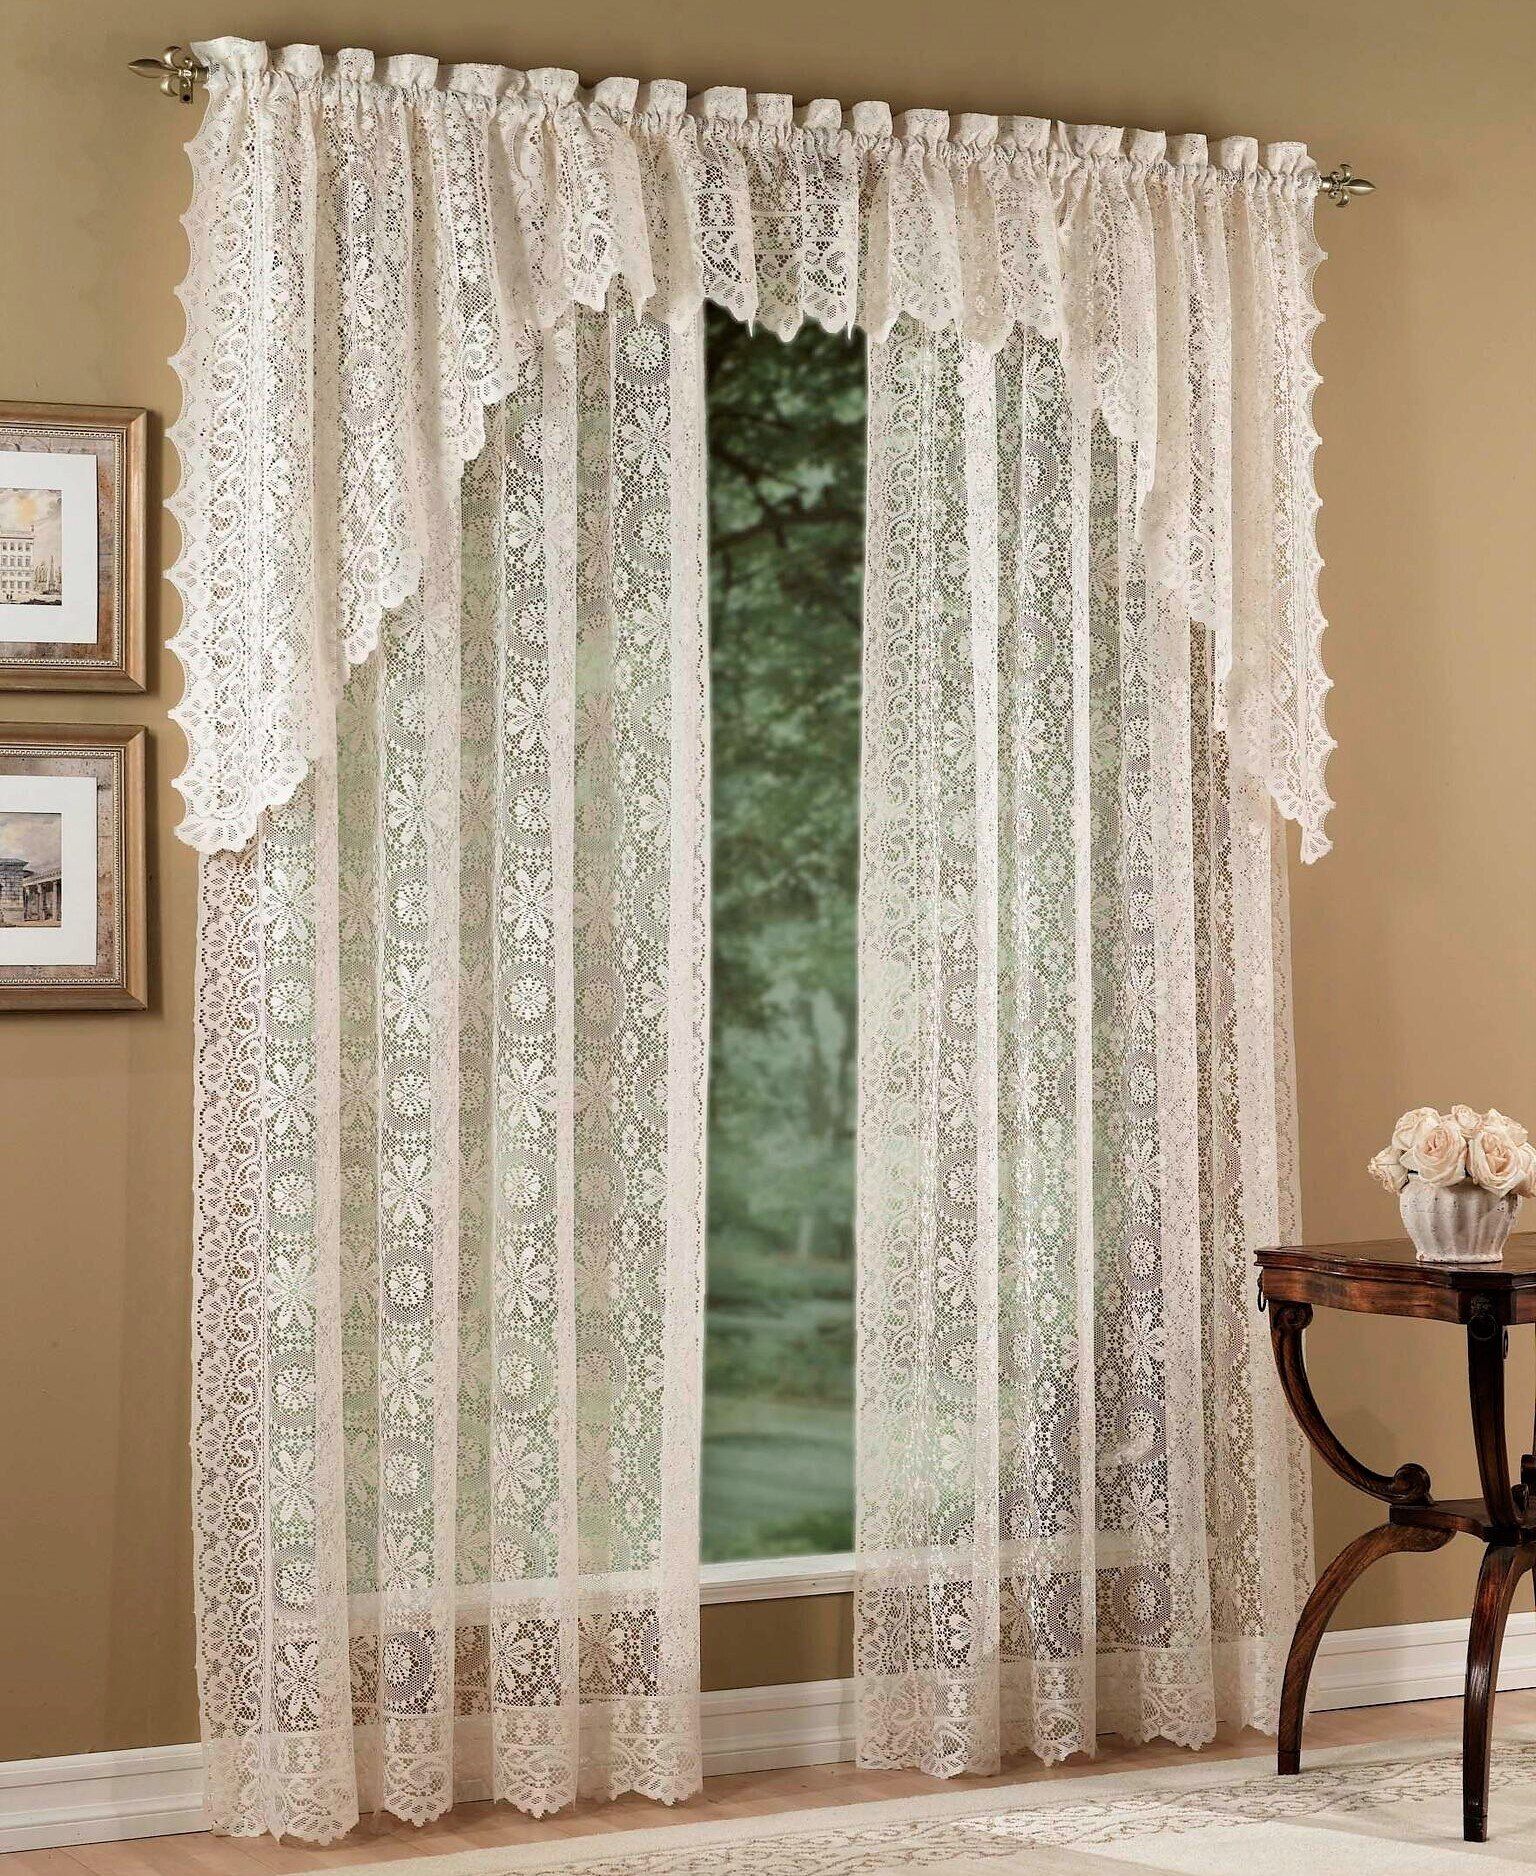 Hopewell Lace 63" Rod Pocket Curtain Panel – Cream Throughout Willow Rod Pocket Window Curtain Panels (View 29 of 30)